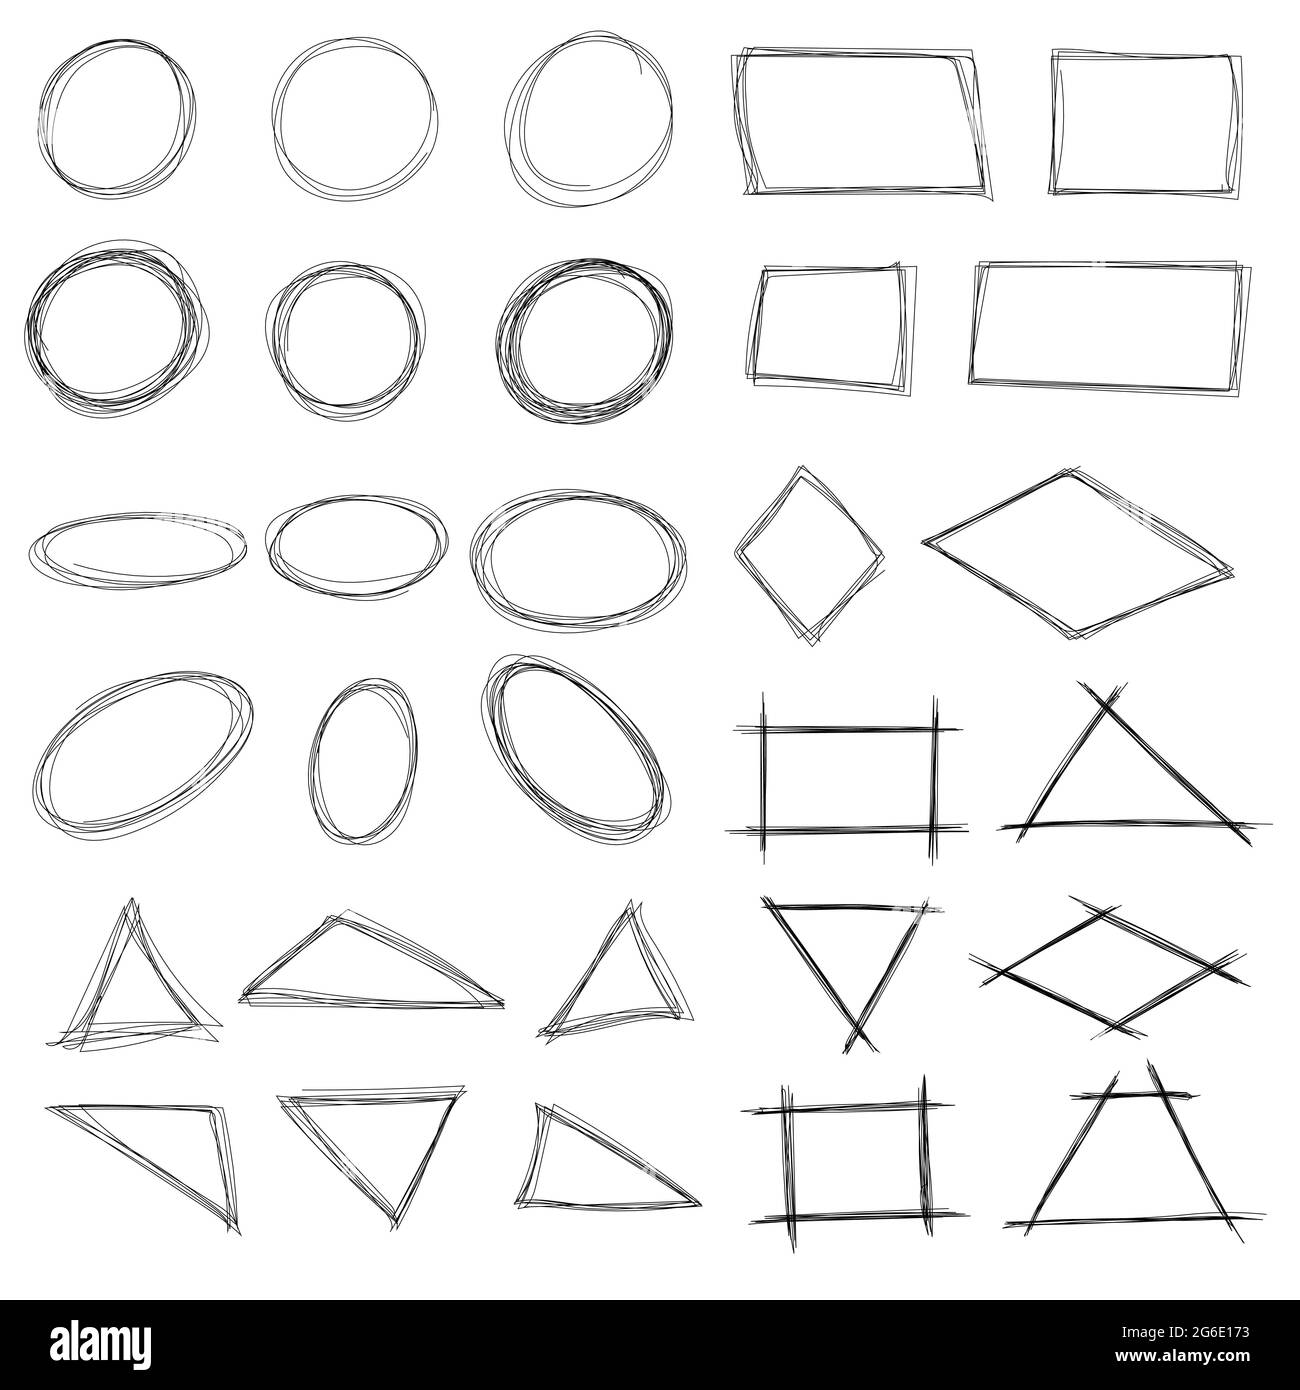 Highlight scribble frame of different shapes - ink pen scrawl borders. Stock Vector